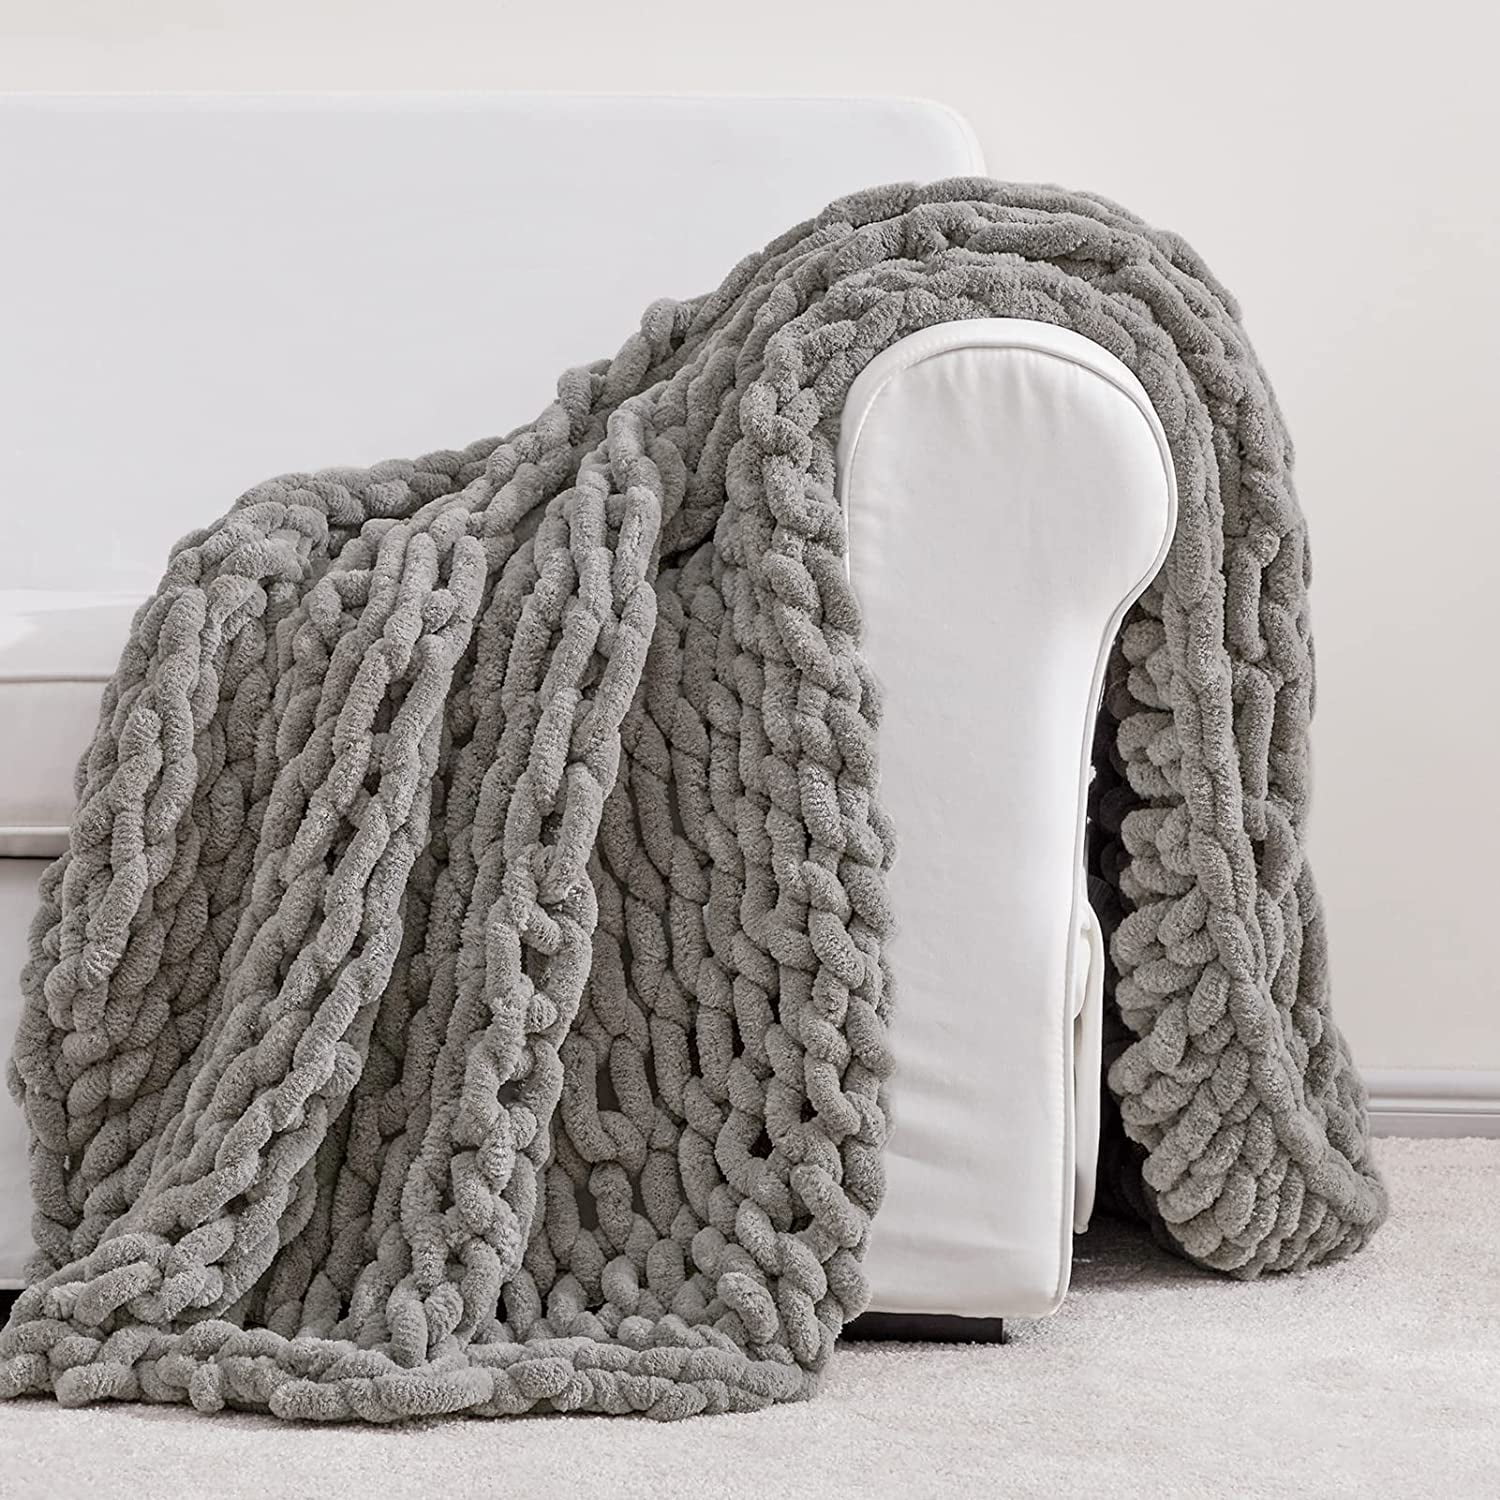 Houseables Chunky Knit Blanket, Crochet Throw, Big Yarn Blankets, 50x60  Inch, Grey, Soft, Large, Chenille, Thick Hand Knitted Cable Throws,  Braided